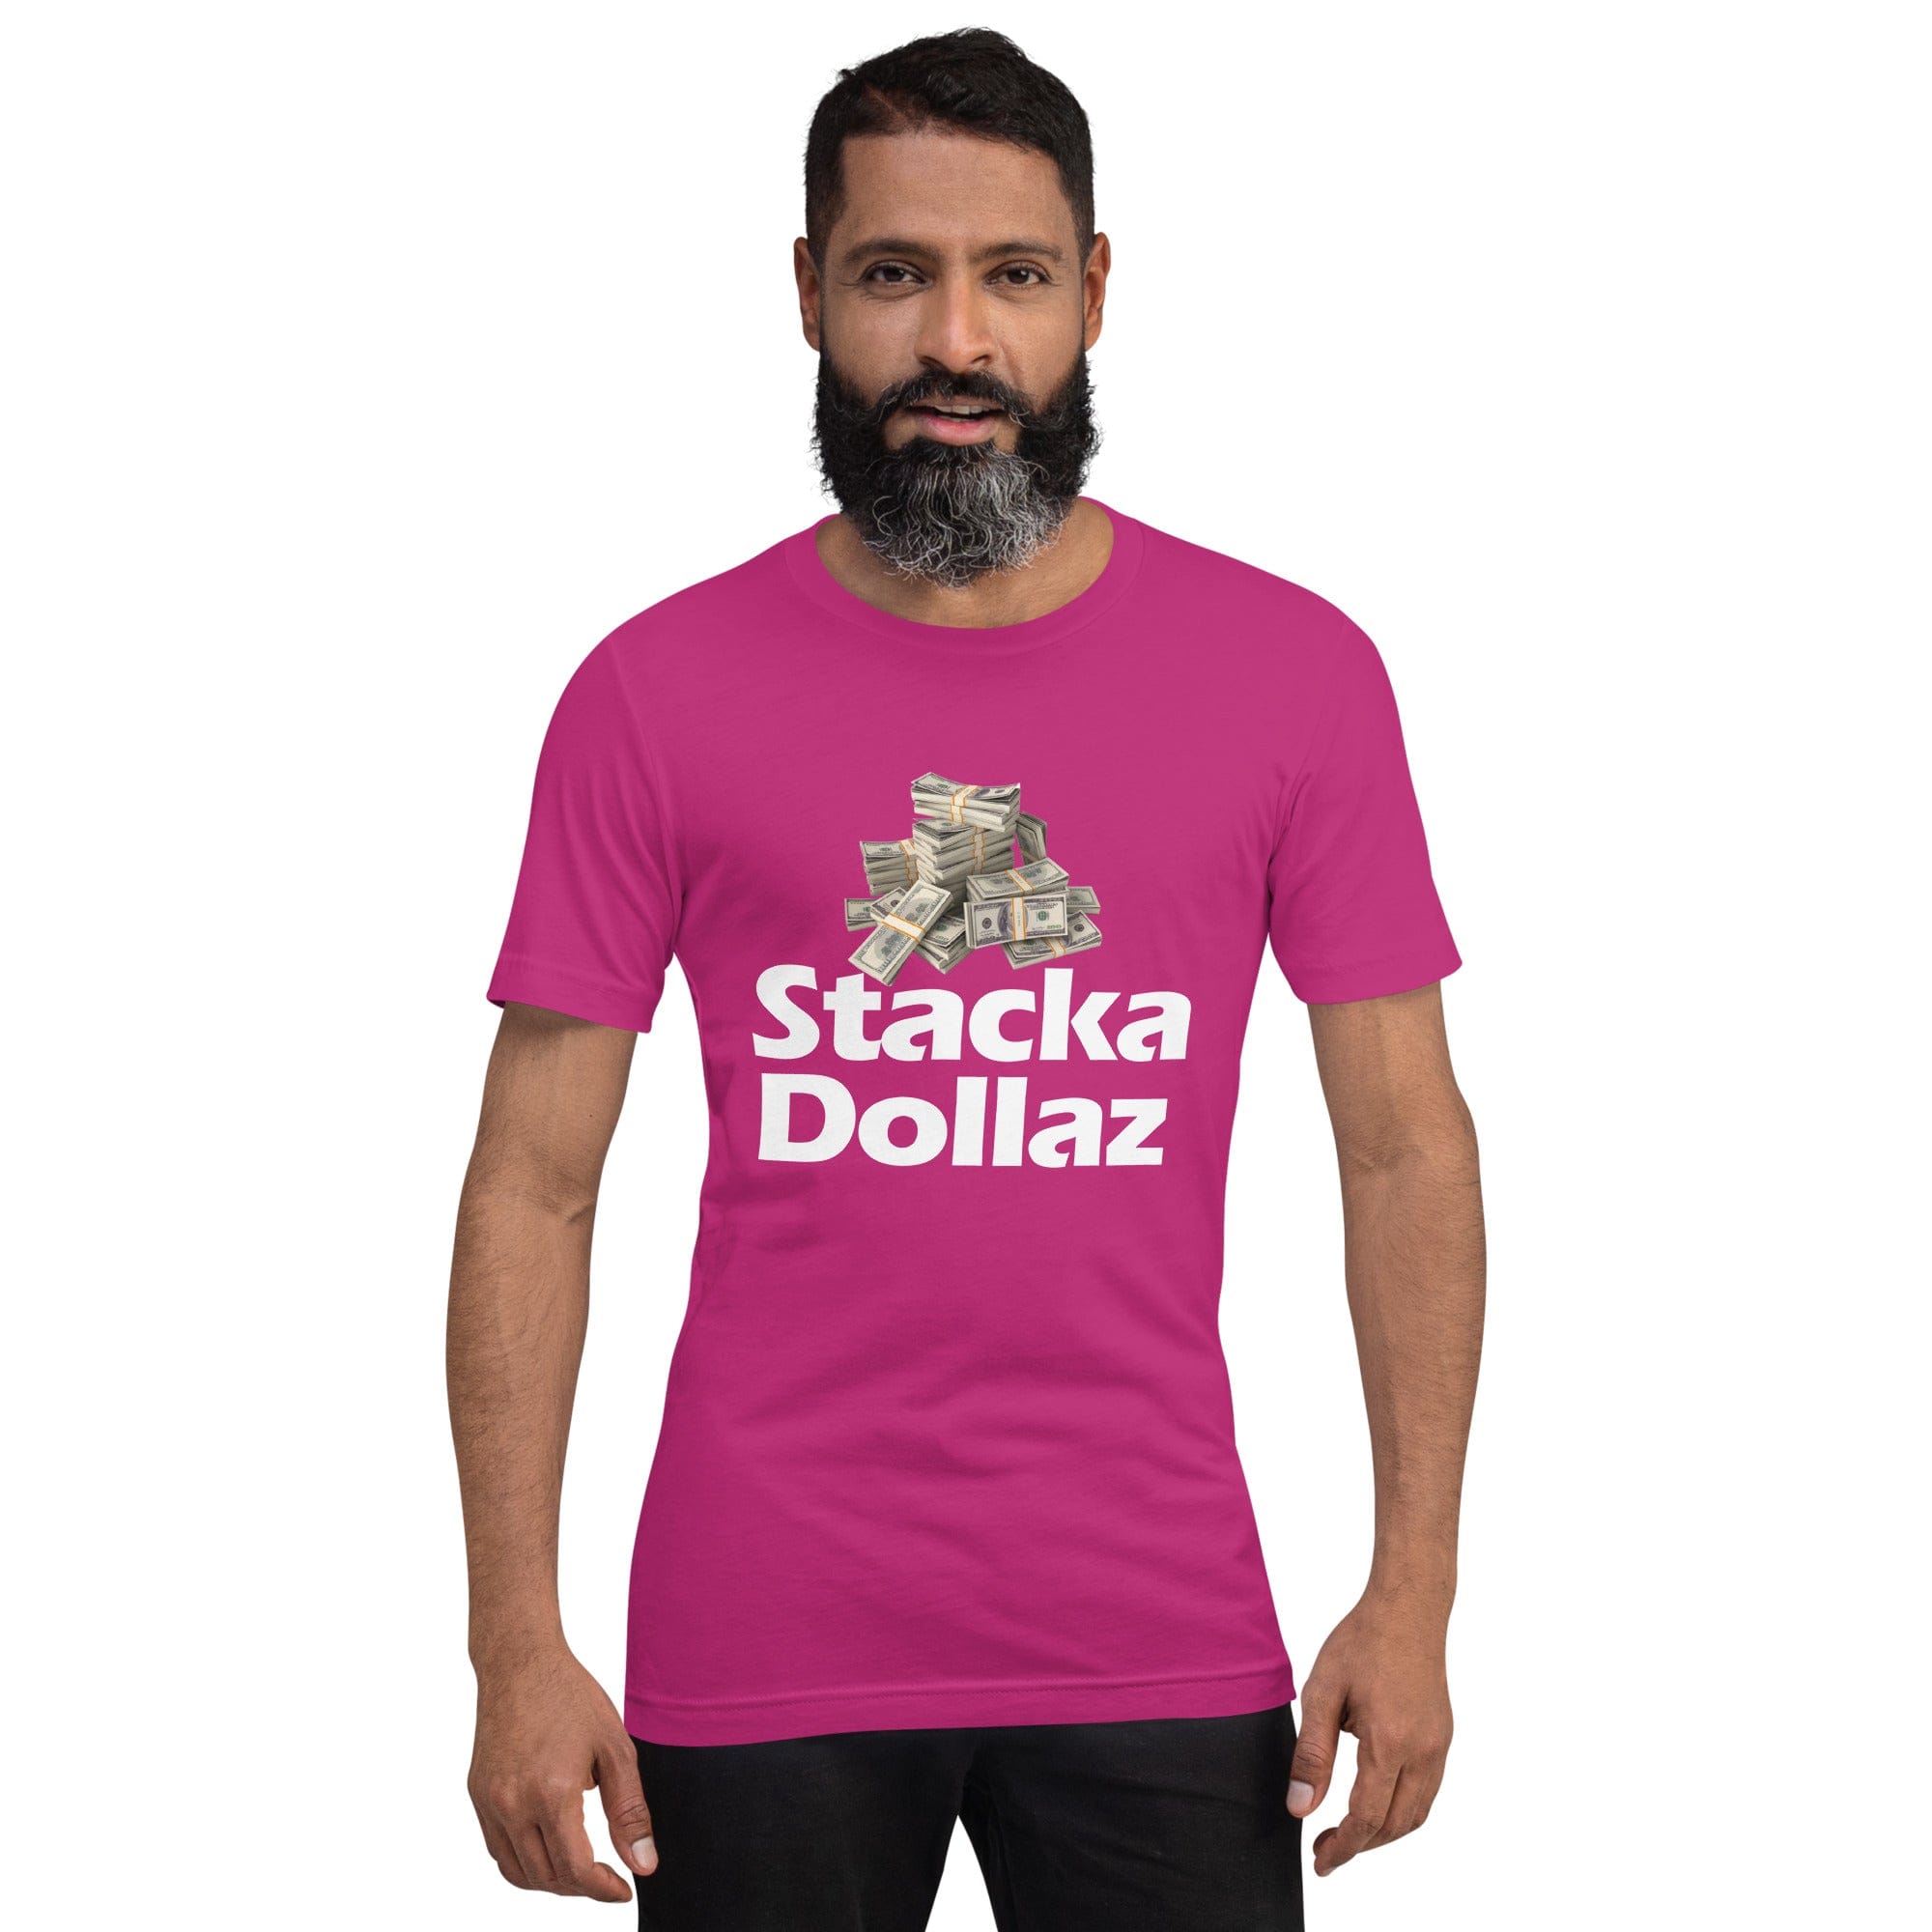 Absolutestacker2 Berry / S Stacka dollaz